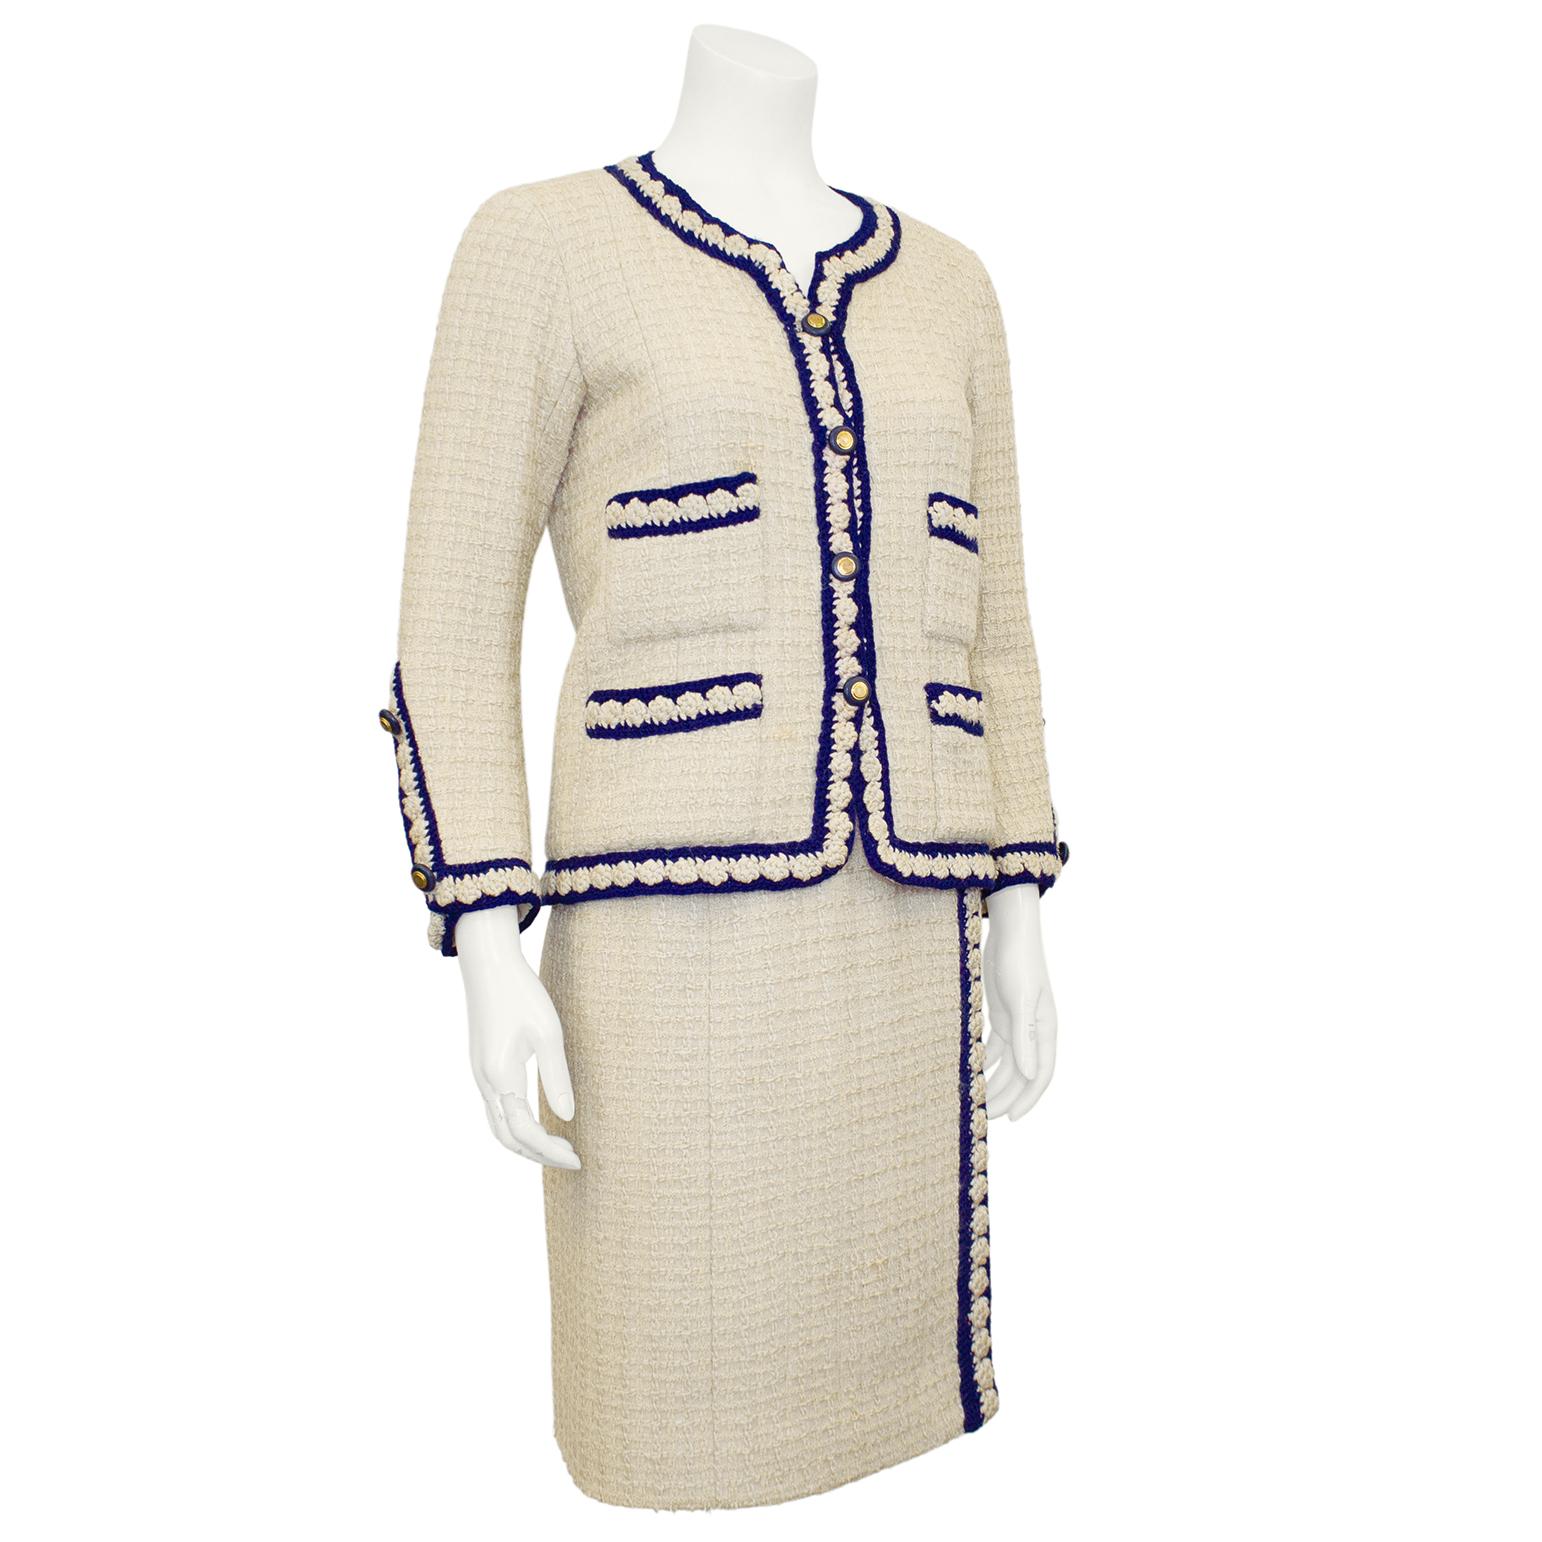 1960's Chanel Haute Couture iconic combination of cream wool boucle and navy braided trim fastened with gilt metal buttons set in navy. This suit represents the timeless classic Chanel look that has been revered and coveted since it first appeared.